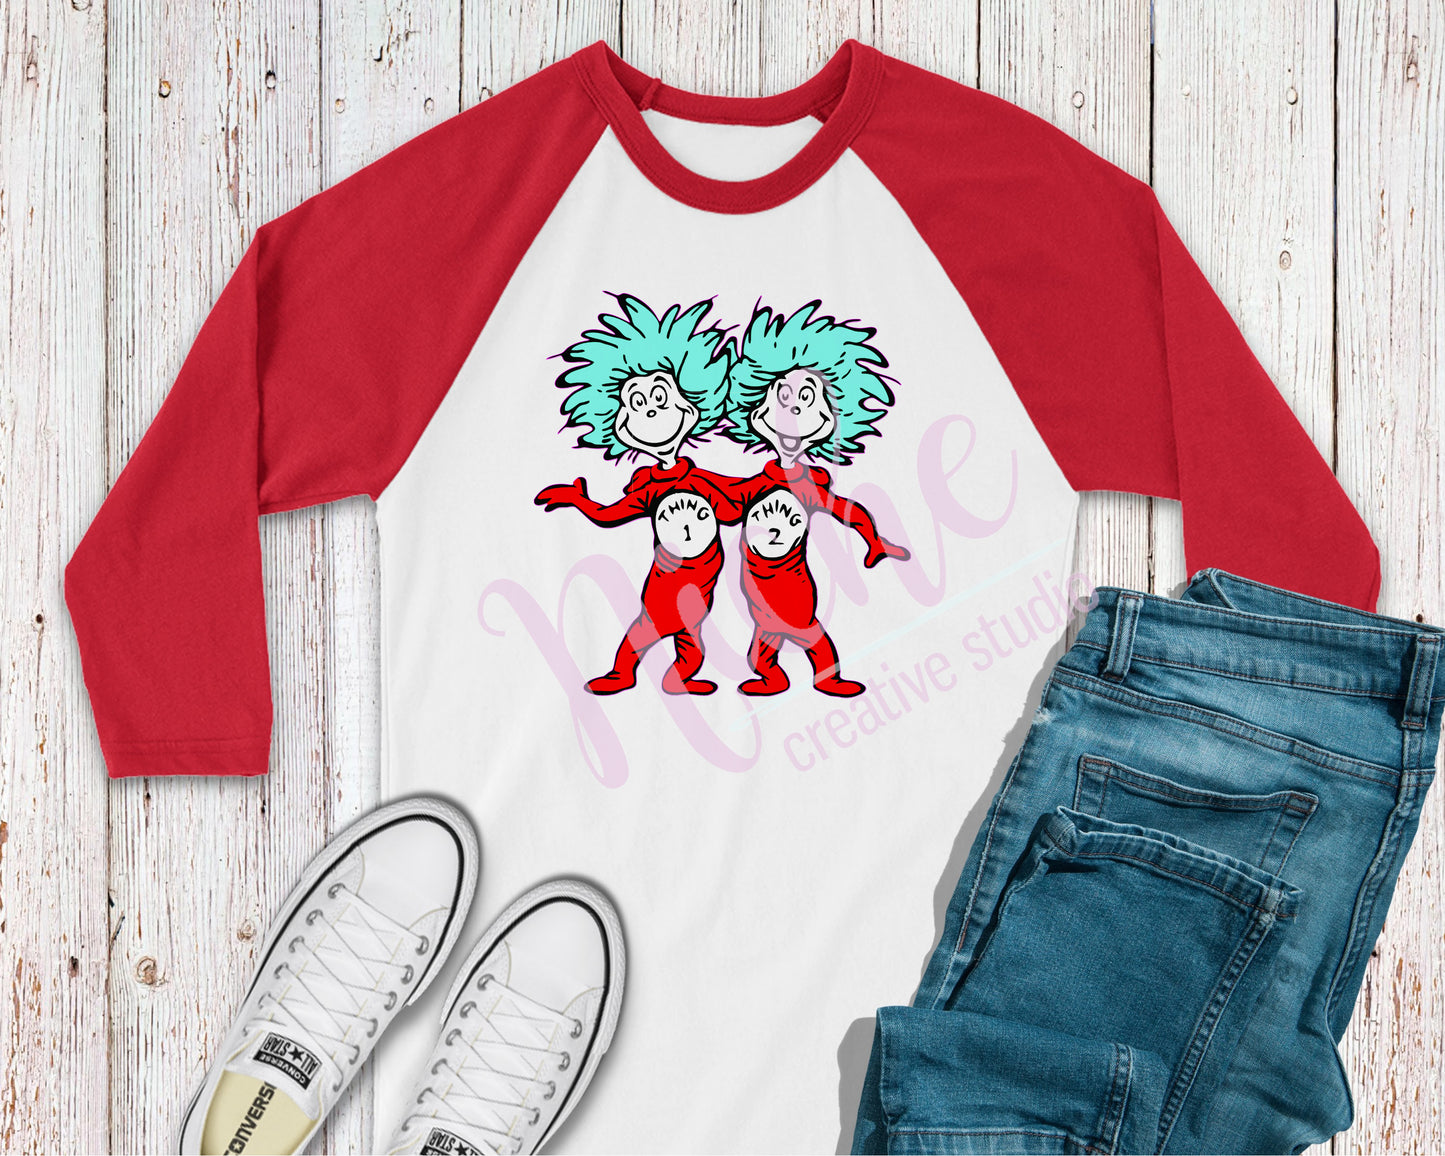 -DRS1389 Thing 1 and Thing 2 Decal